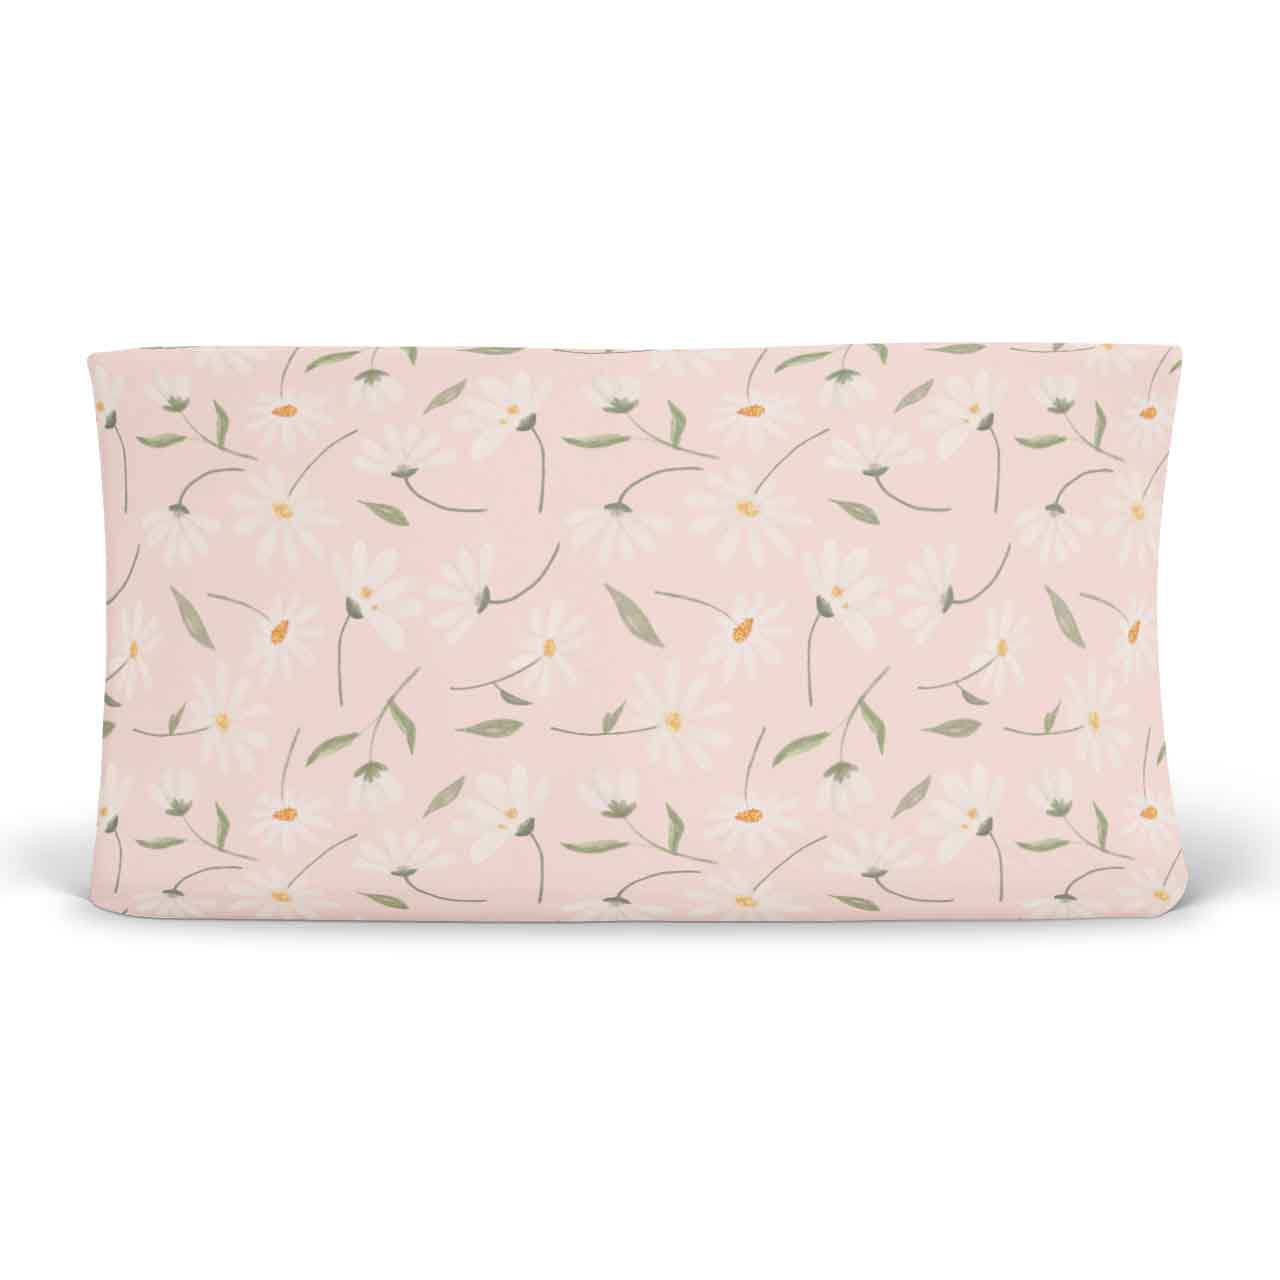 Sweet Daisy in Blush Changing Pad Cover